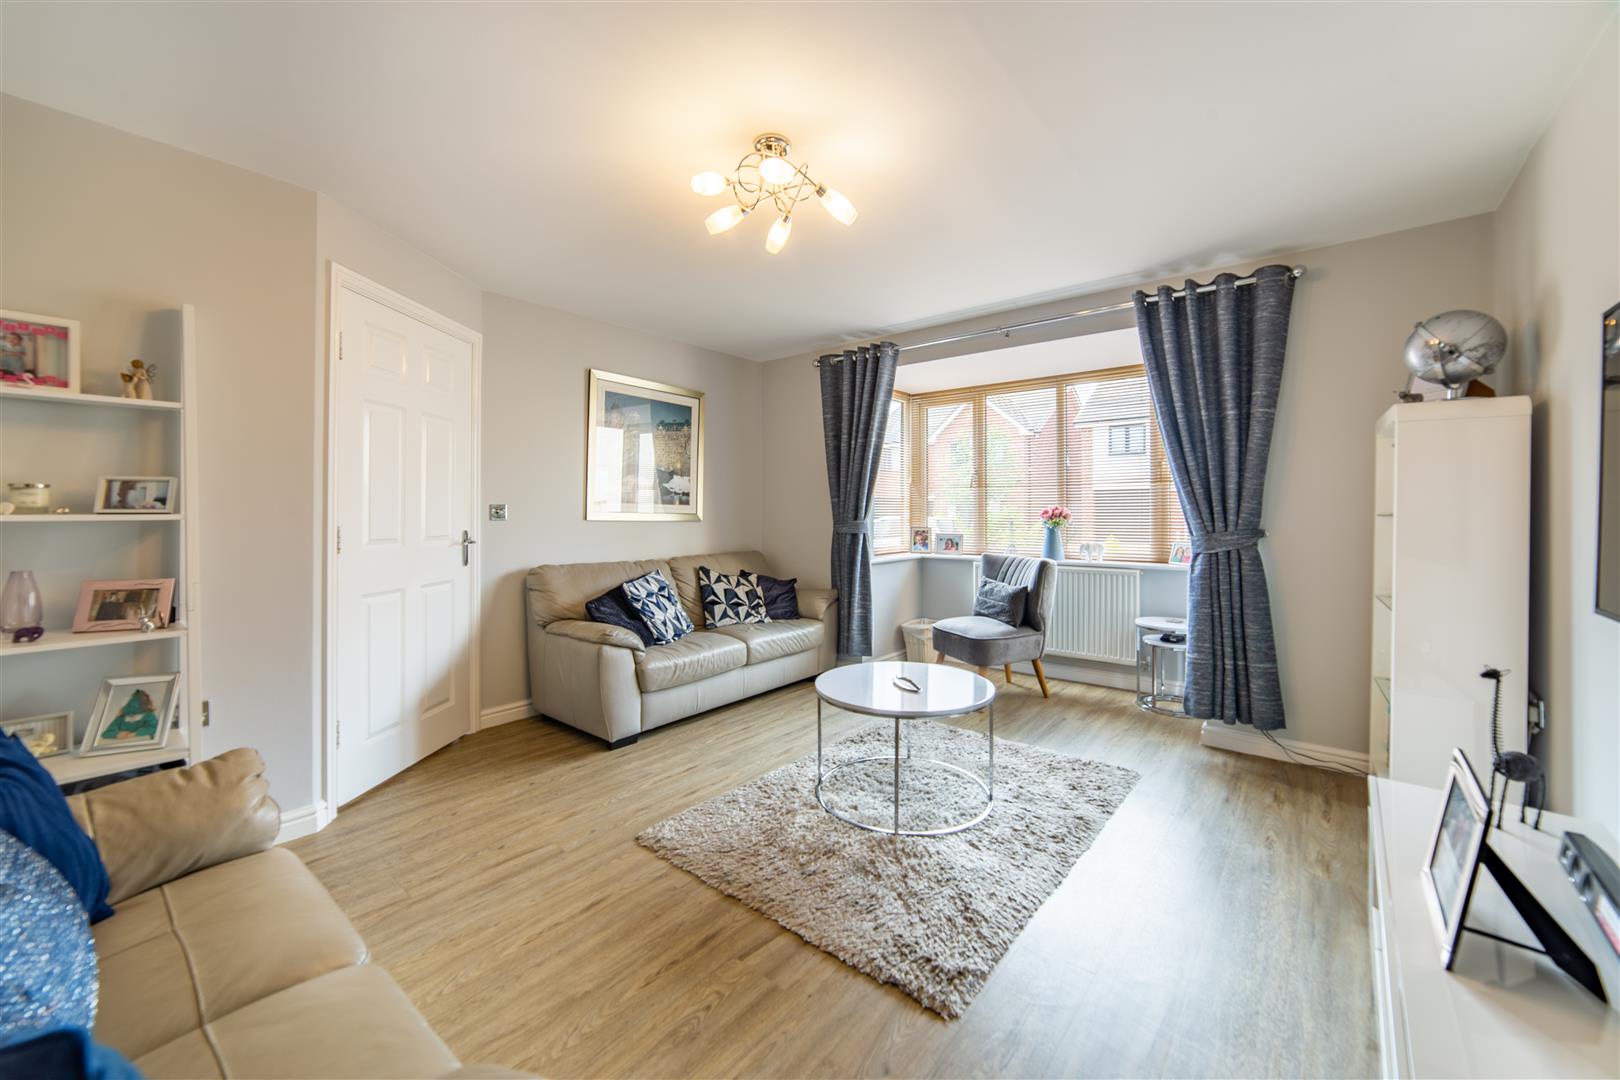 4 bed detached house for sale in Maynard Street, Great Park 1